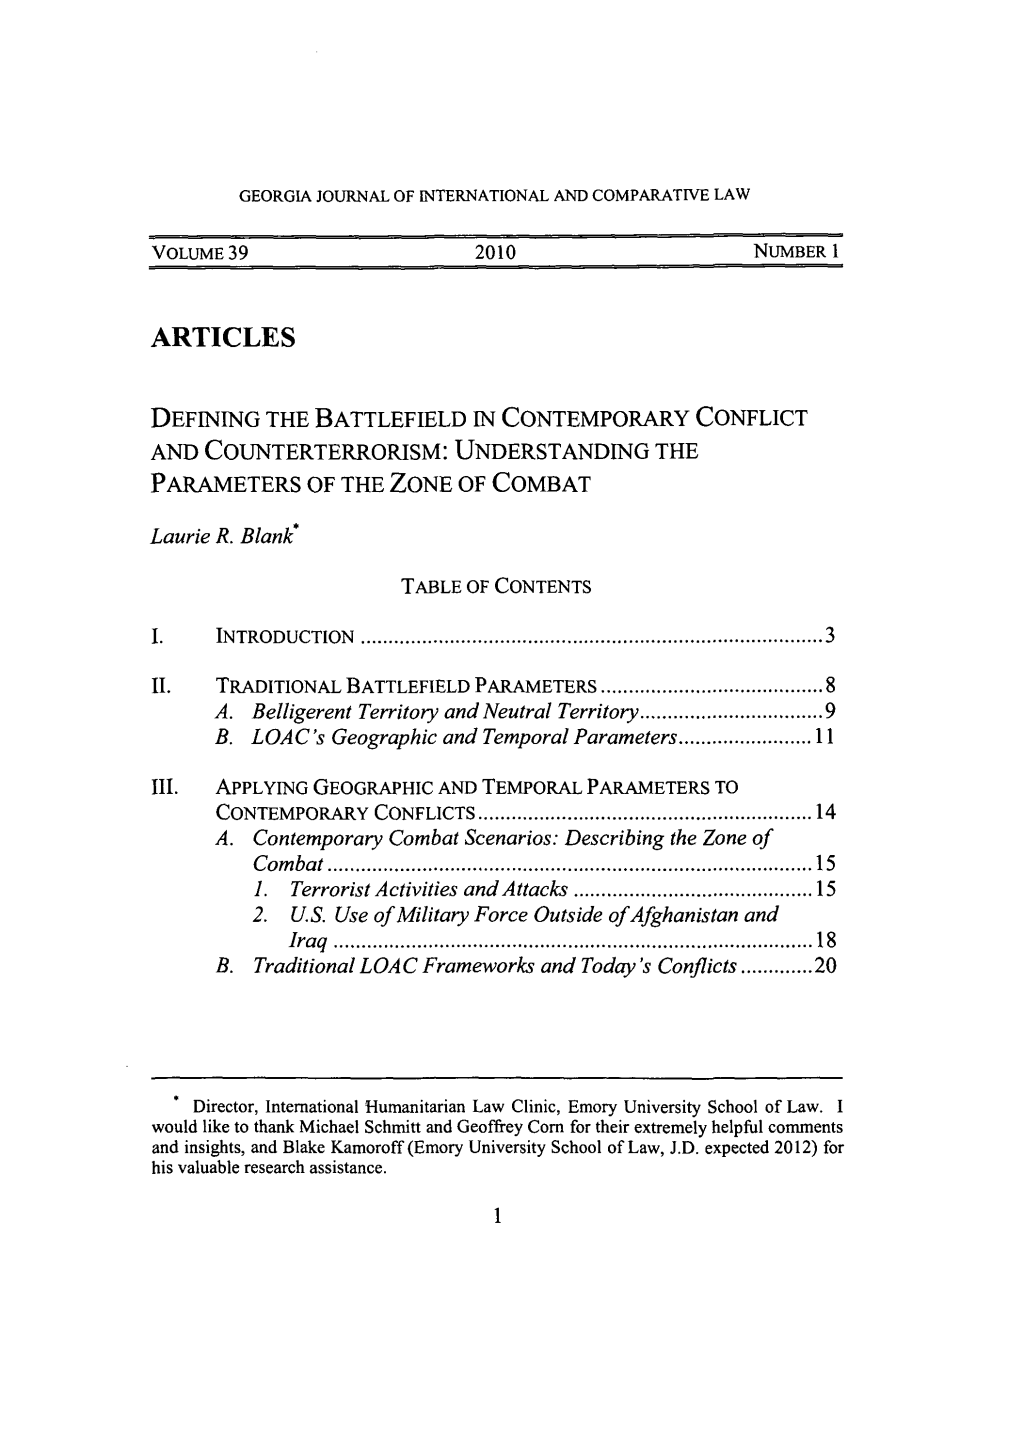 Defining the Battlefield in Contemporary Conflict and Counterterrorism: Understanding the Parameters of the Zone of Combat